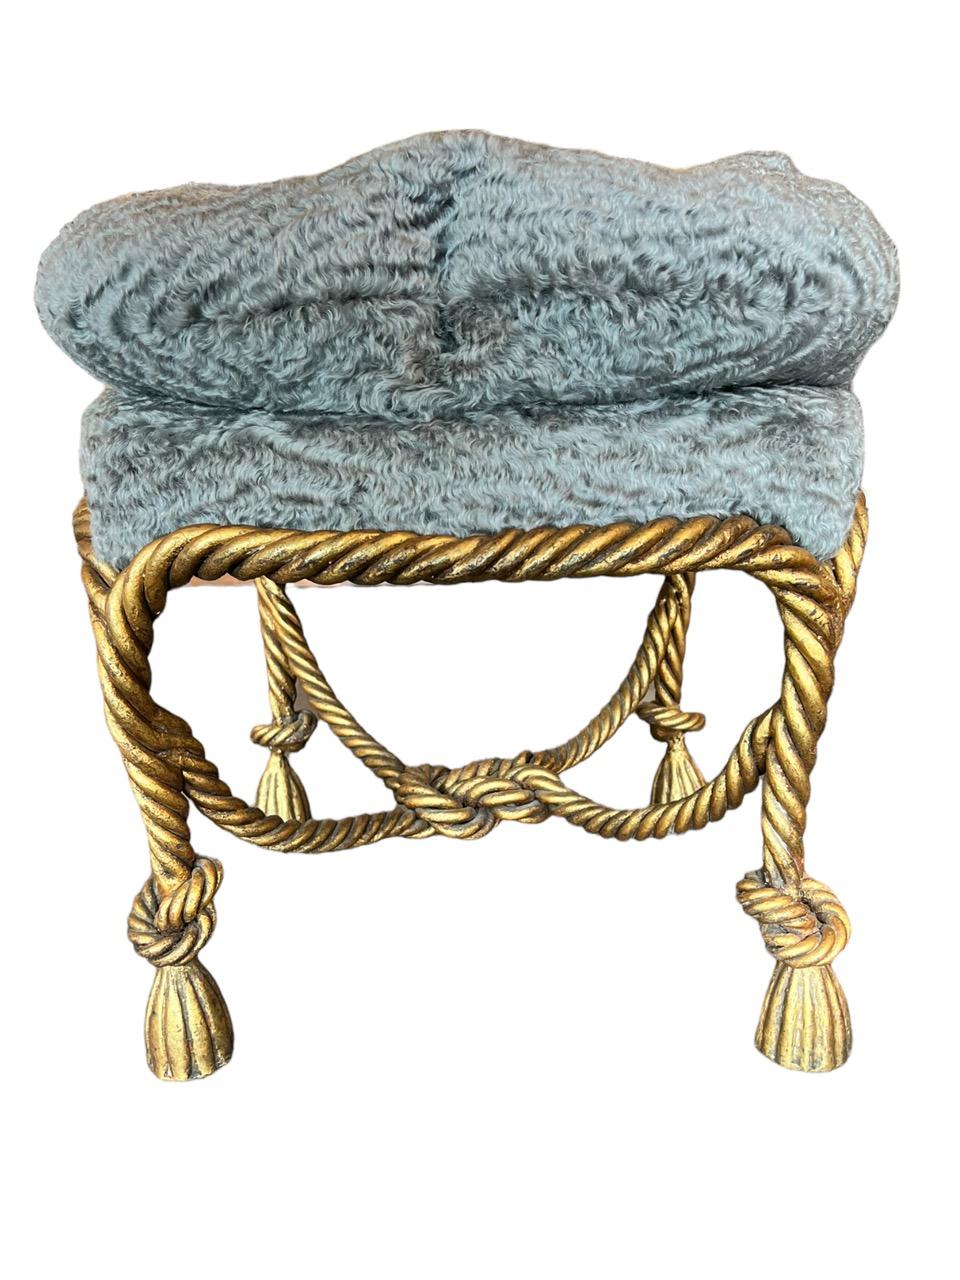 Pair of Early 20th Century Italian Gilt Gold Metal Rope Stools For Sale 9